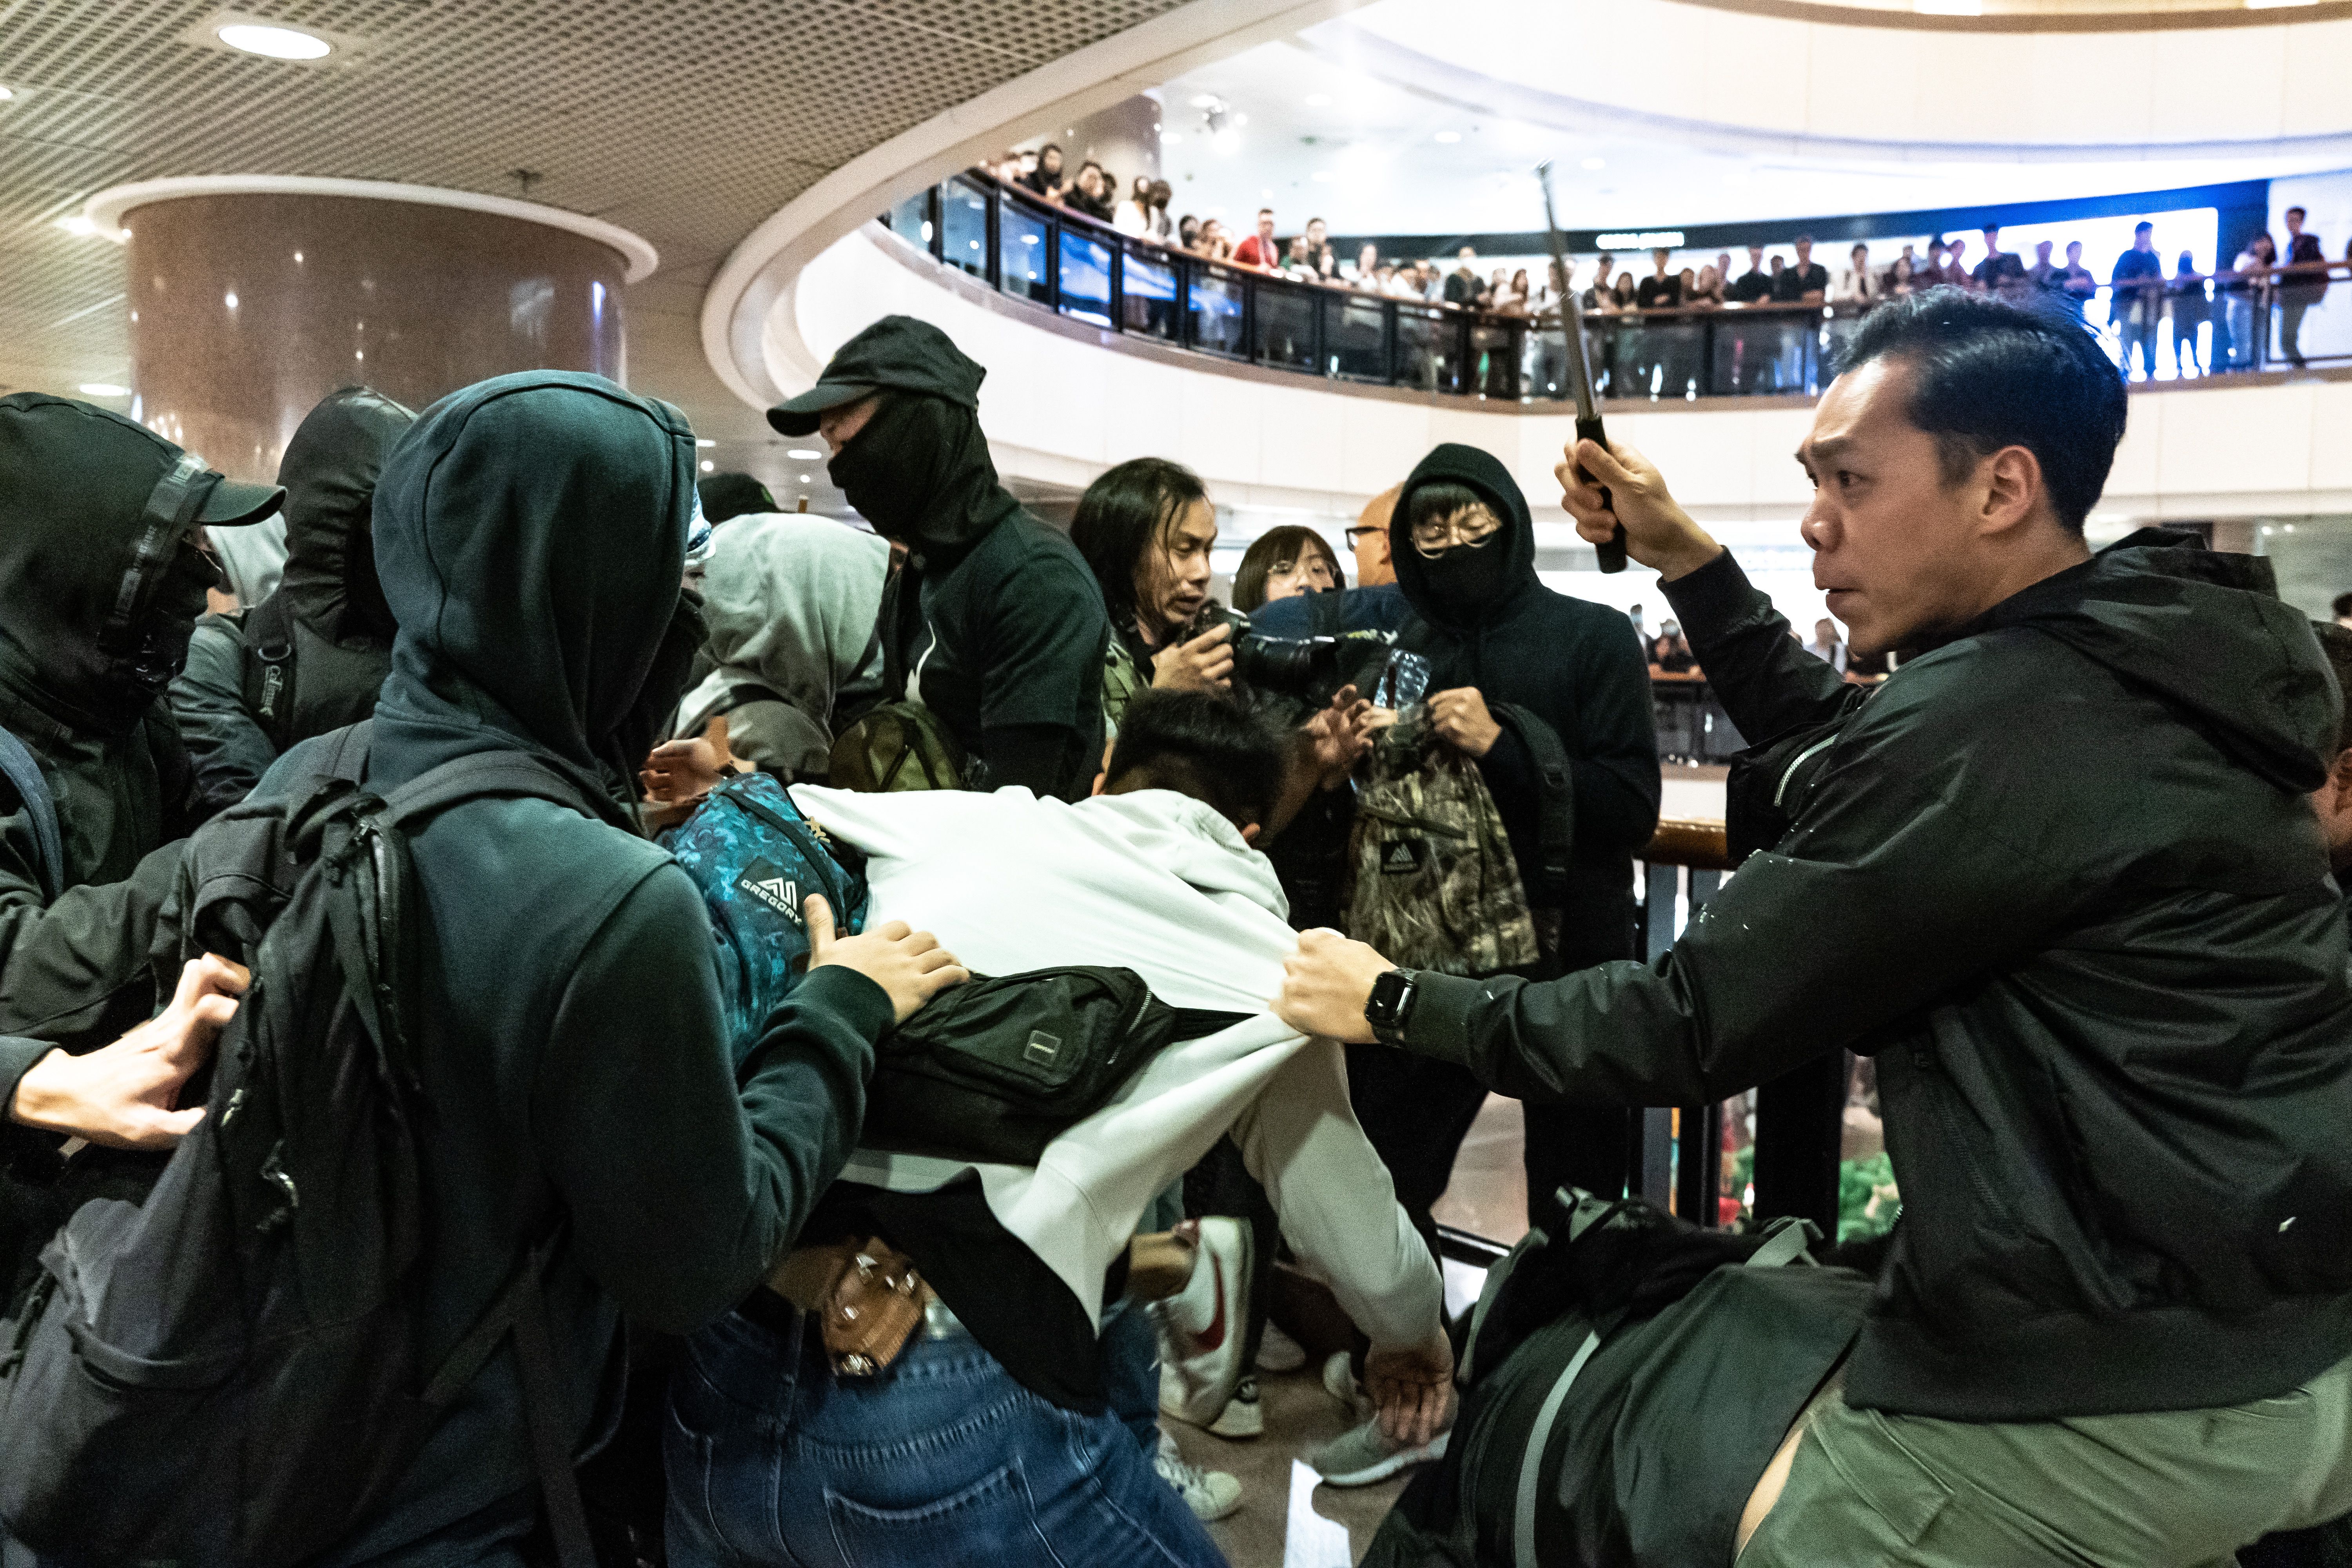 Plain clothes police react during a clash with protesters in a shopping mall on December 24, 2019 in Hong Kong